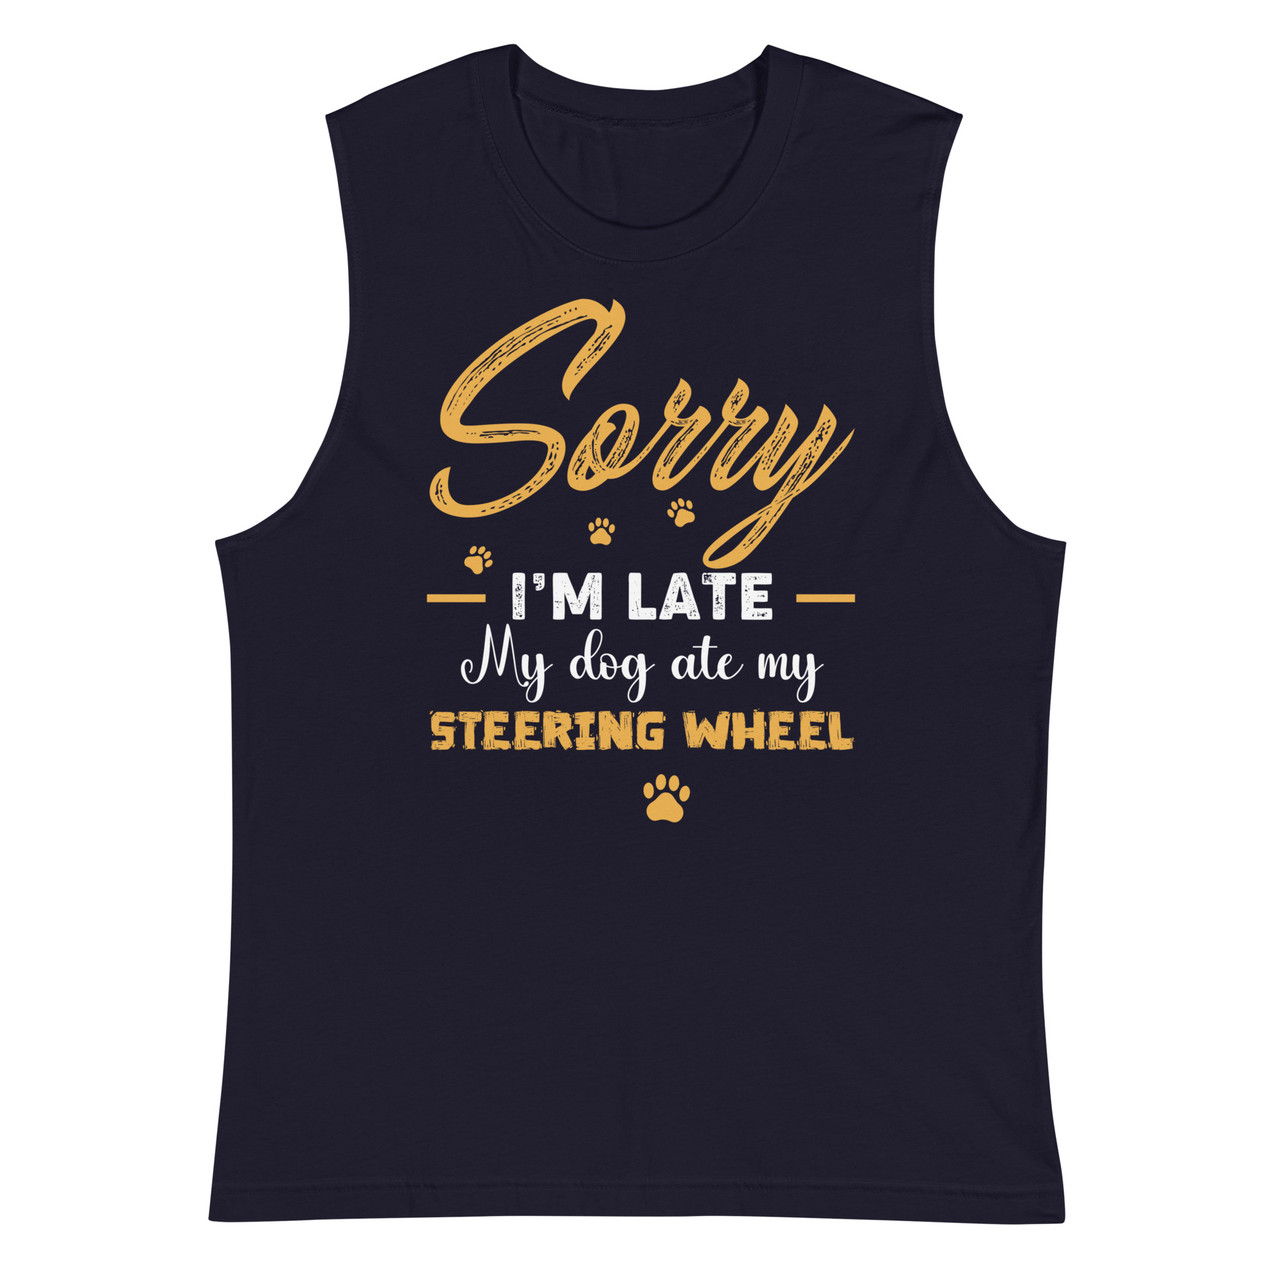 Sorry I'm Late My Dog Ate My Steering Wheel Unisex Muscle Shirt - Bella + Canvas 3483 